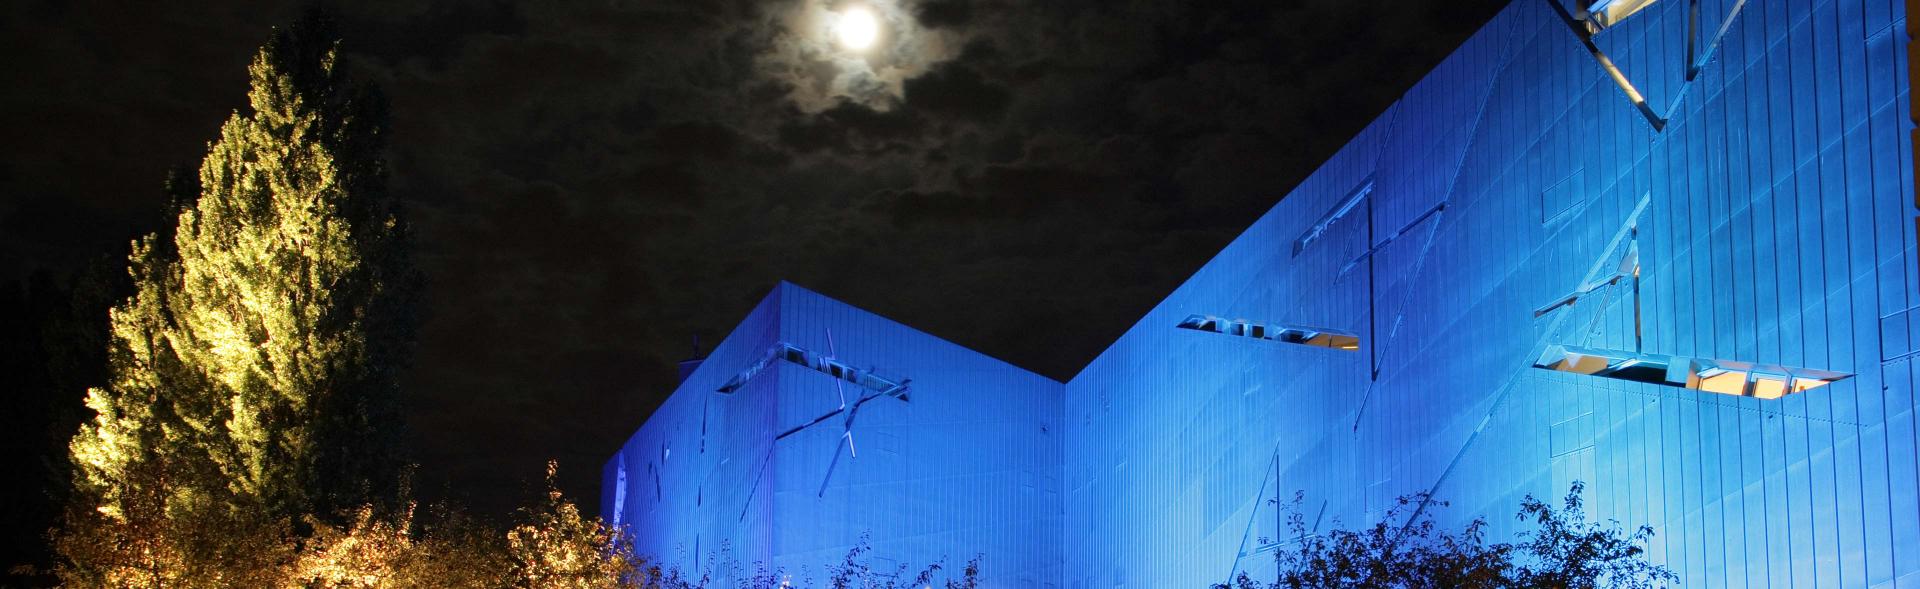 Libeskind Buildig in blue light at night, during full moon